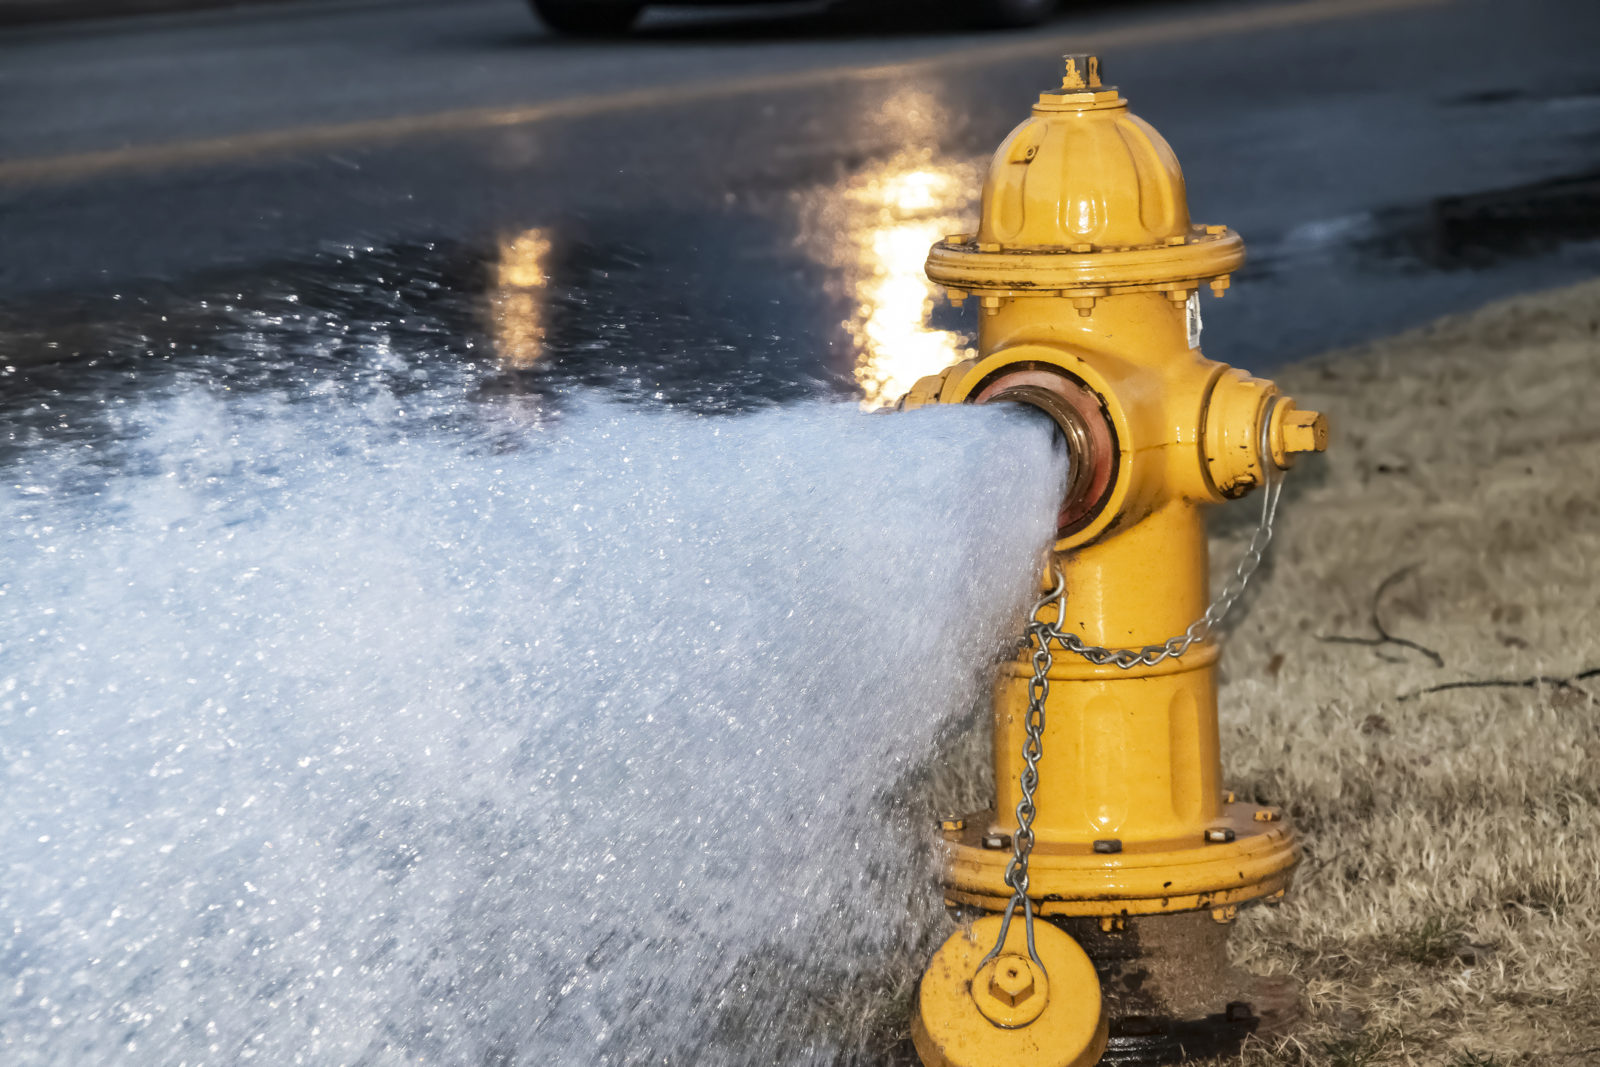 A yellow hydrant gushes water across the street. LCA crews open hydrants to perform system flushing.